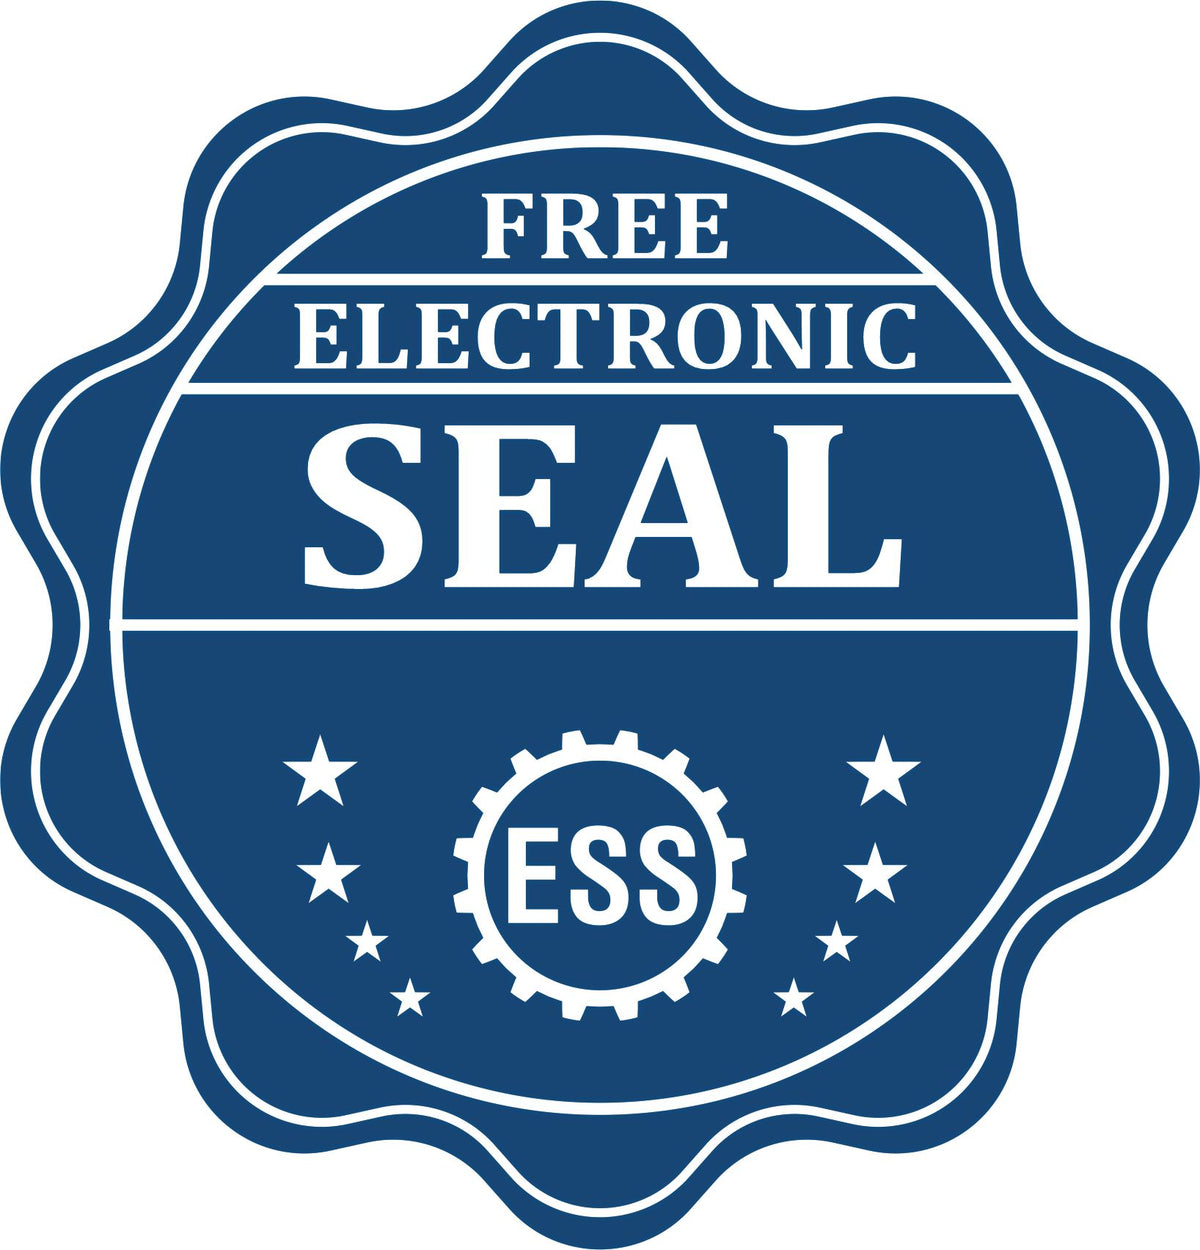 A badge showing a free electronic seal for the Premium MaxLight Pre-Inked Kentucky Landscape Architectural Stamp with stars and the ESS gear on the emblem.